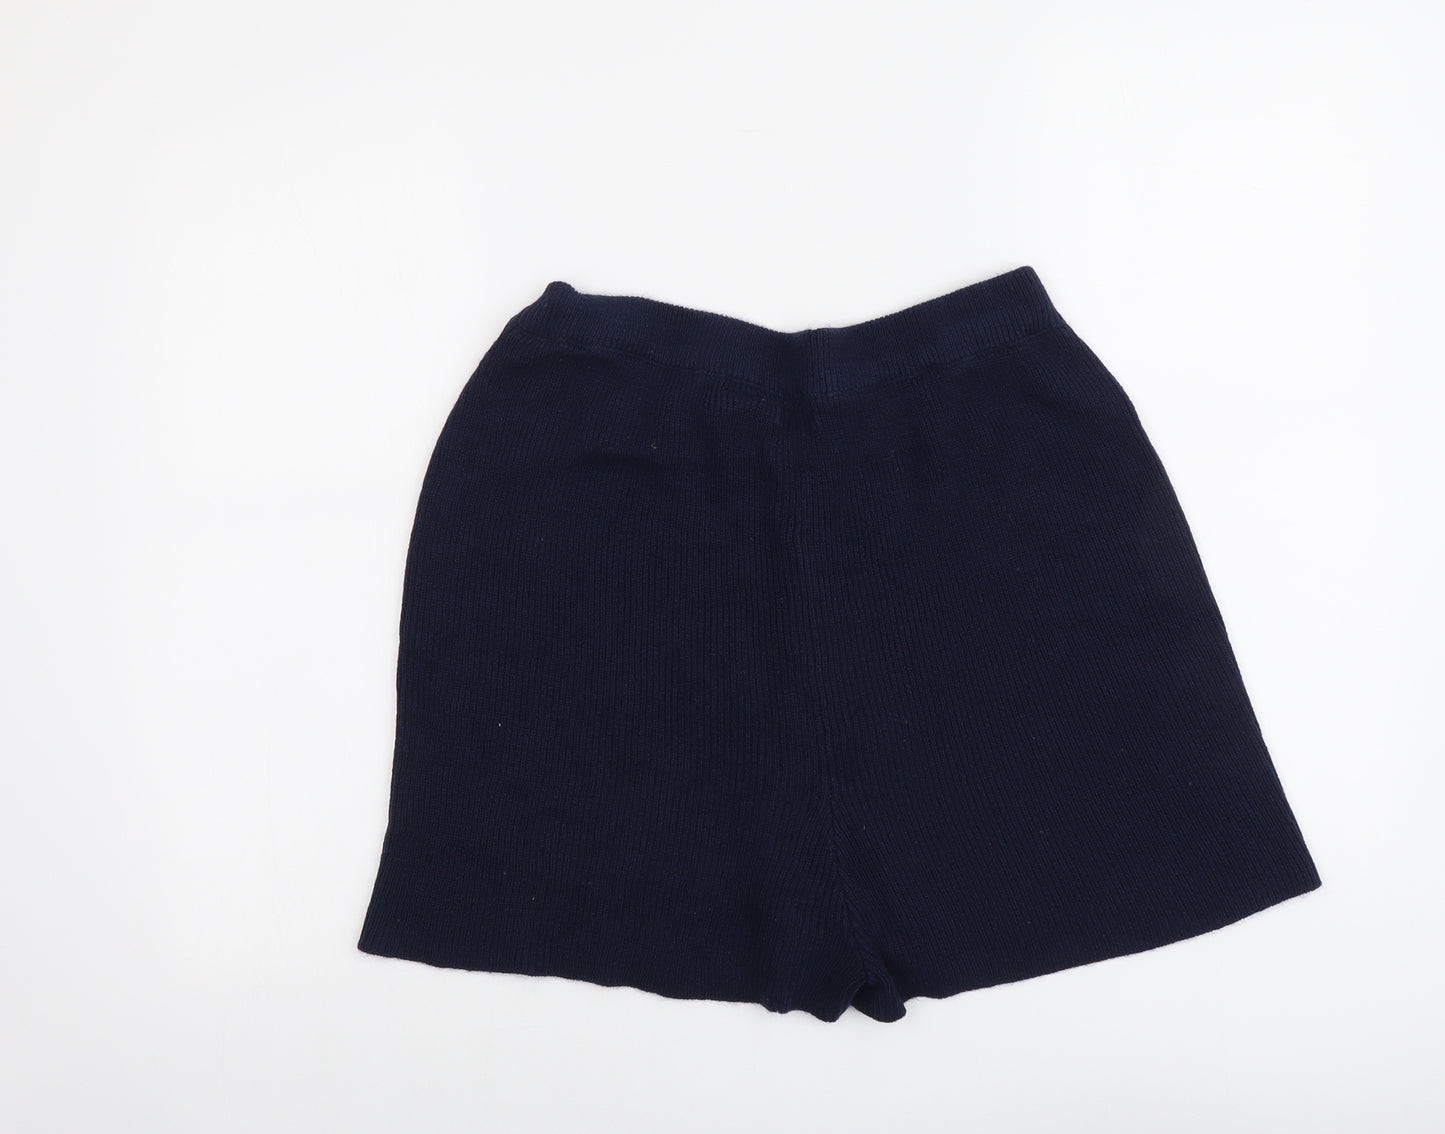 Boohoo Womens Blue Acrylic Hot Pants Shorts Size M L3 in Regular Pull On